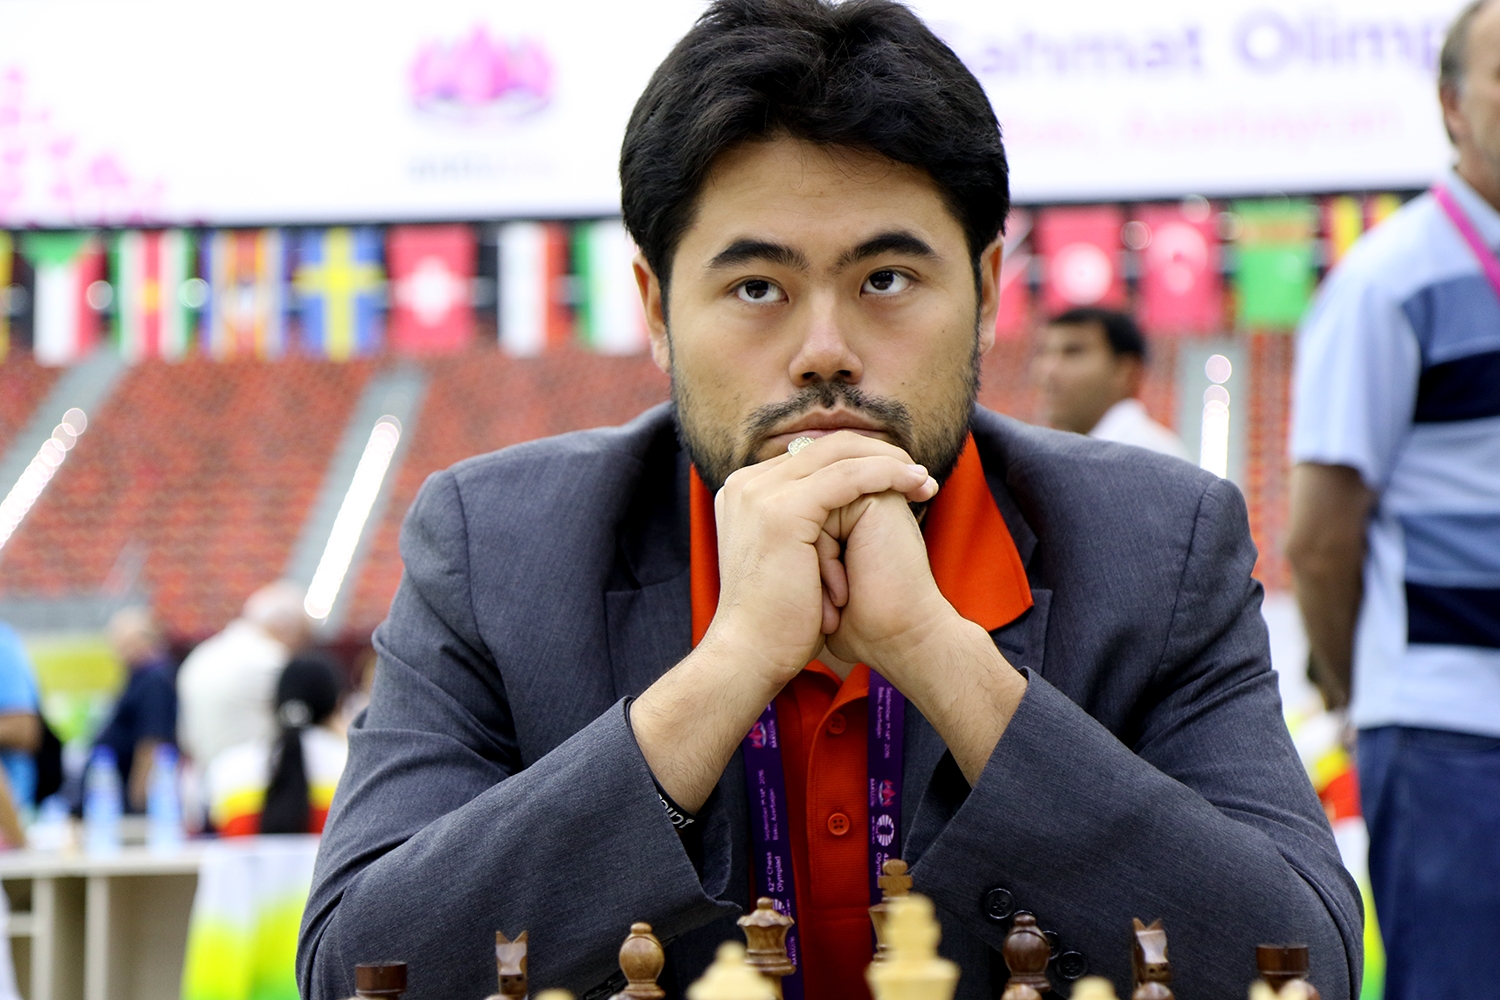 Chess player Hikaru Nakamura of the United States poses at the